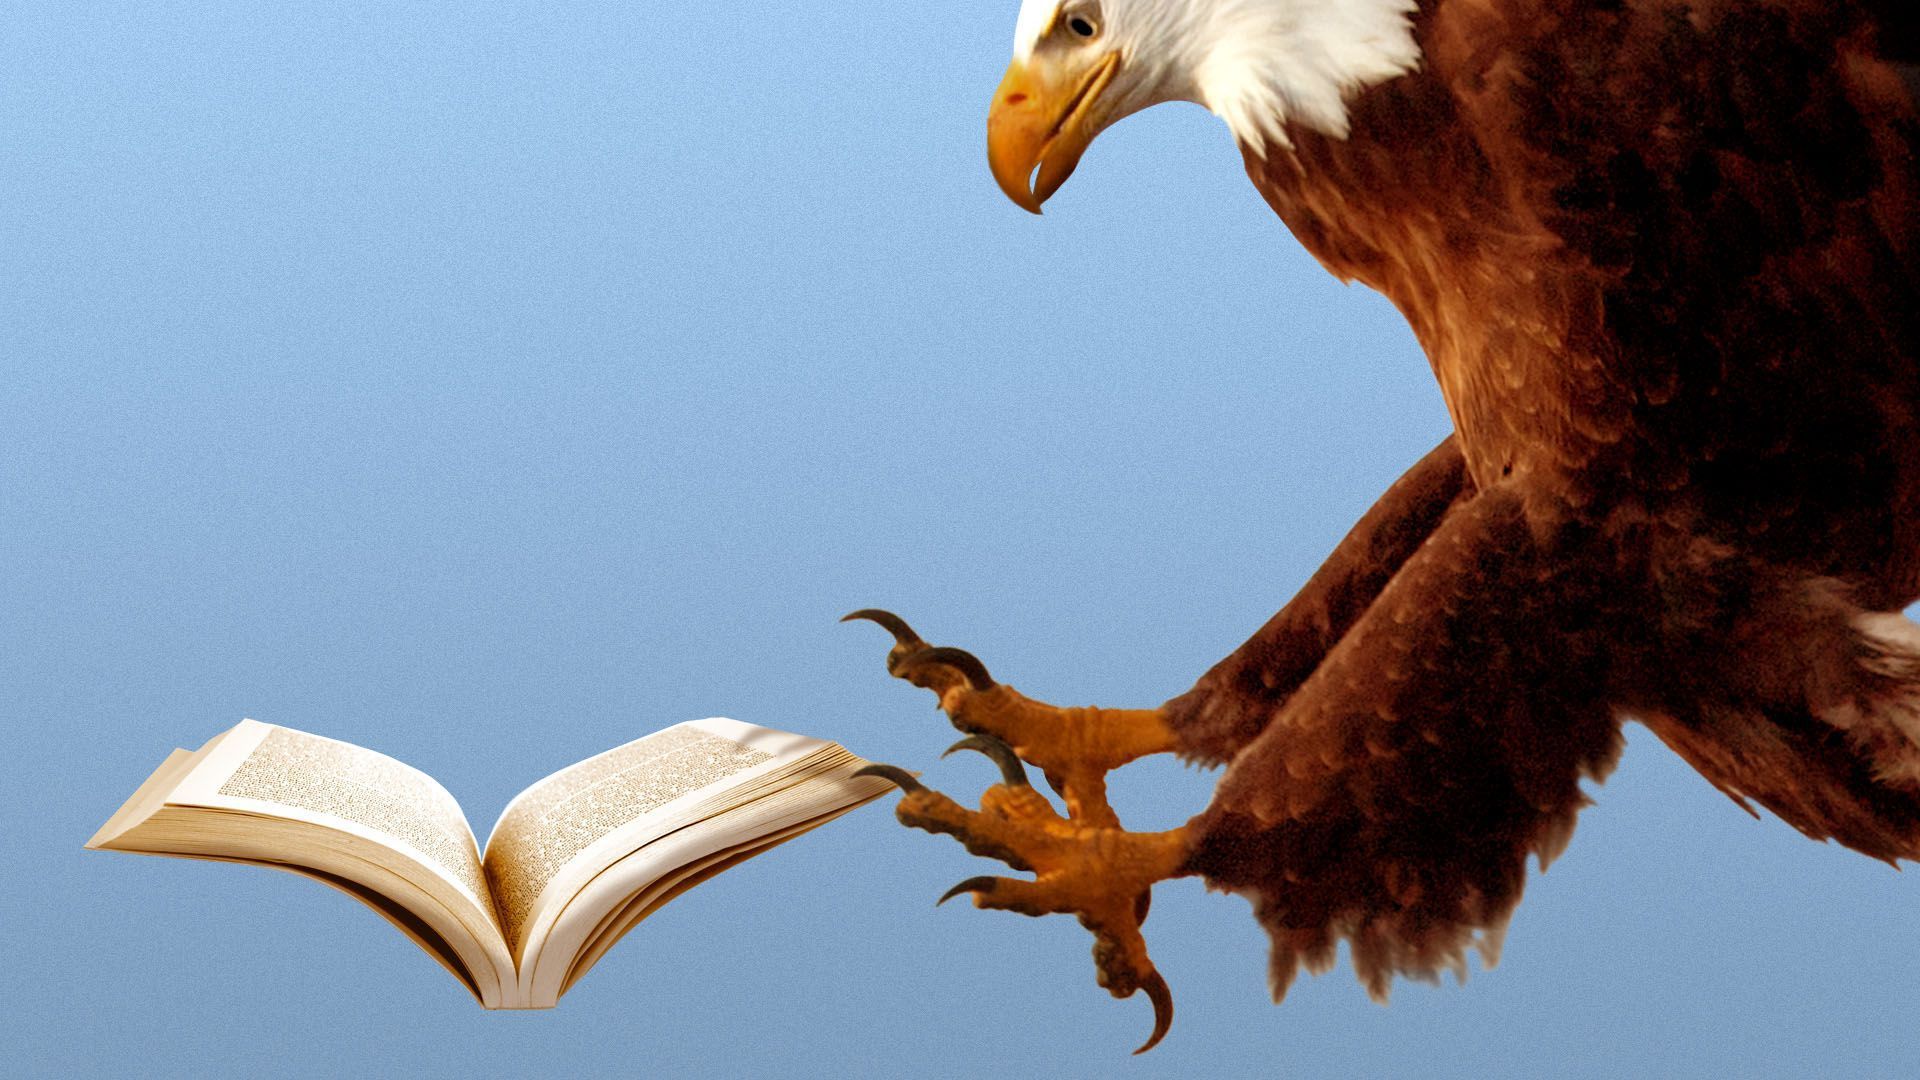 Illustration of a bald eagle and a book.